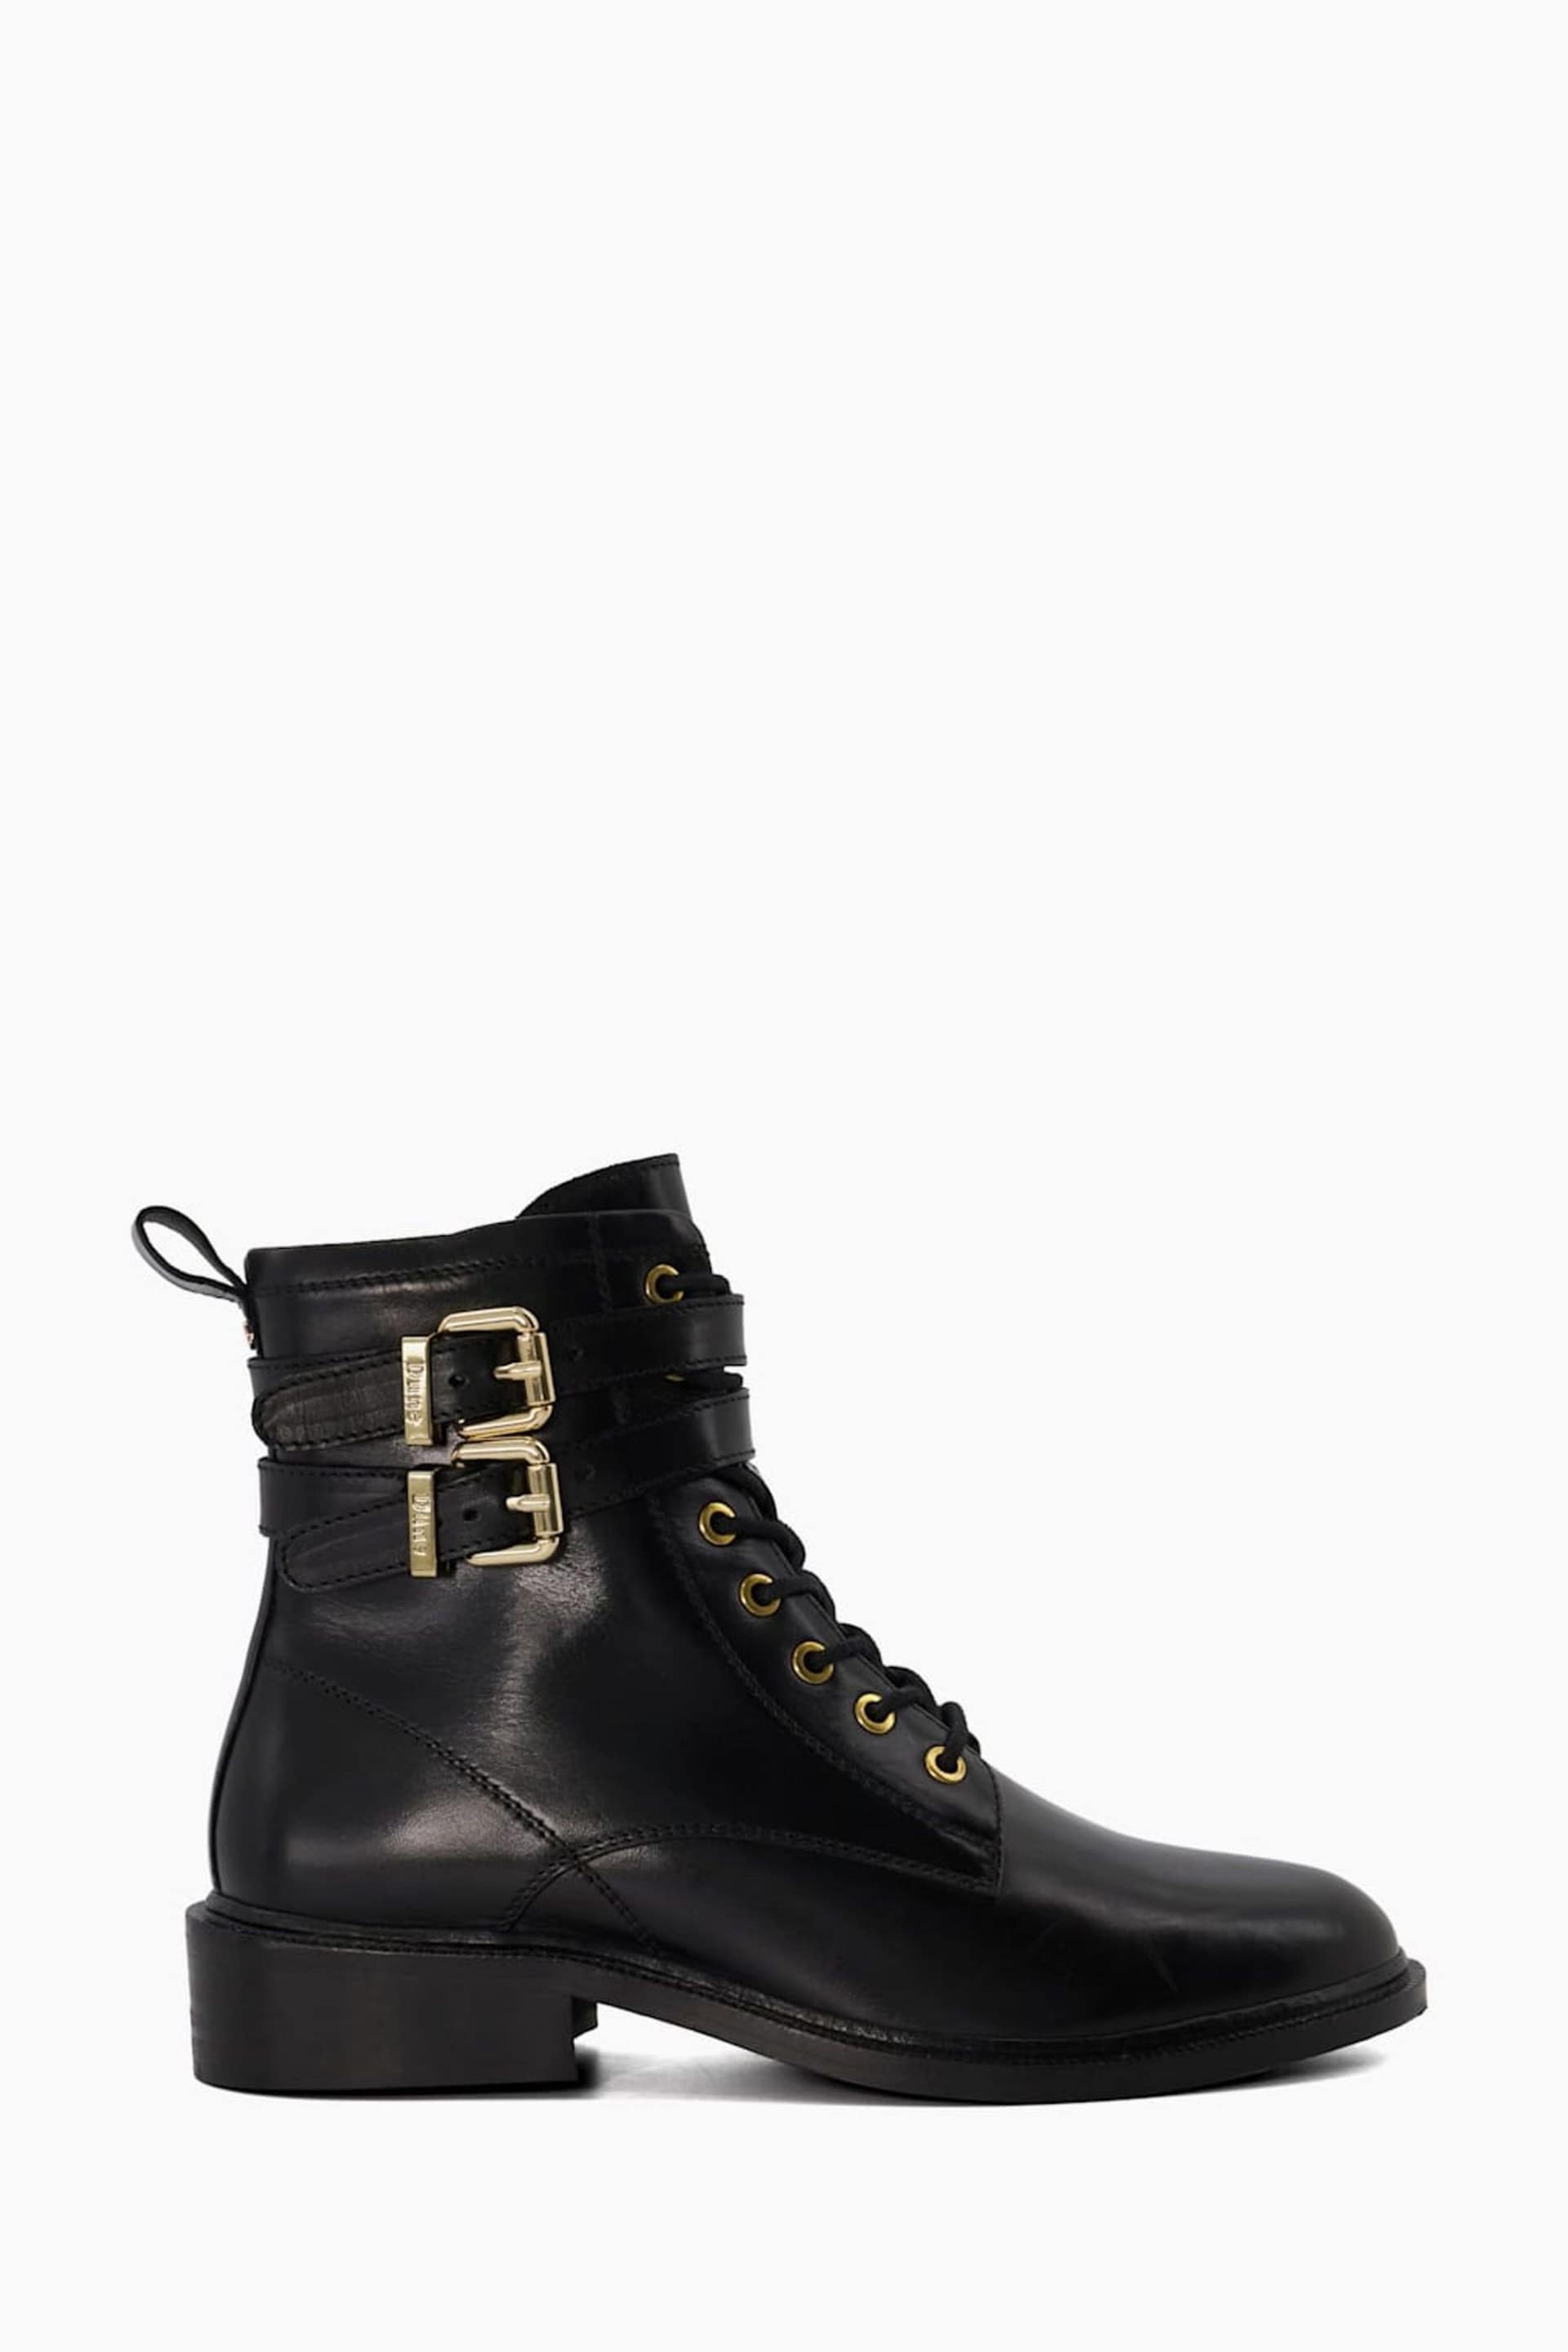 Dune London Black Double Buckle Lace-Up Phyllis Boots - Image 1 of 6